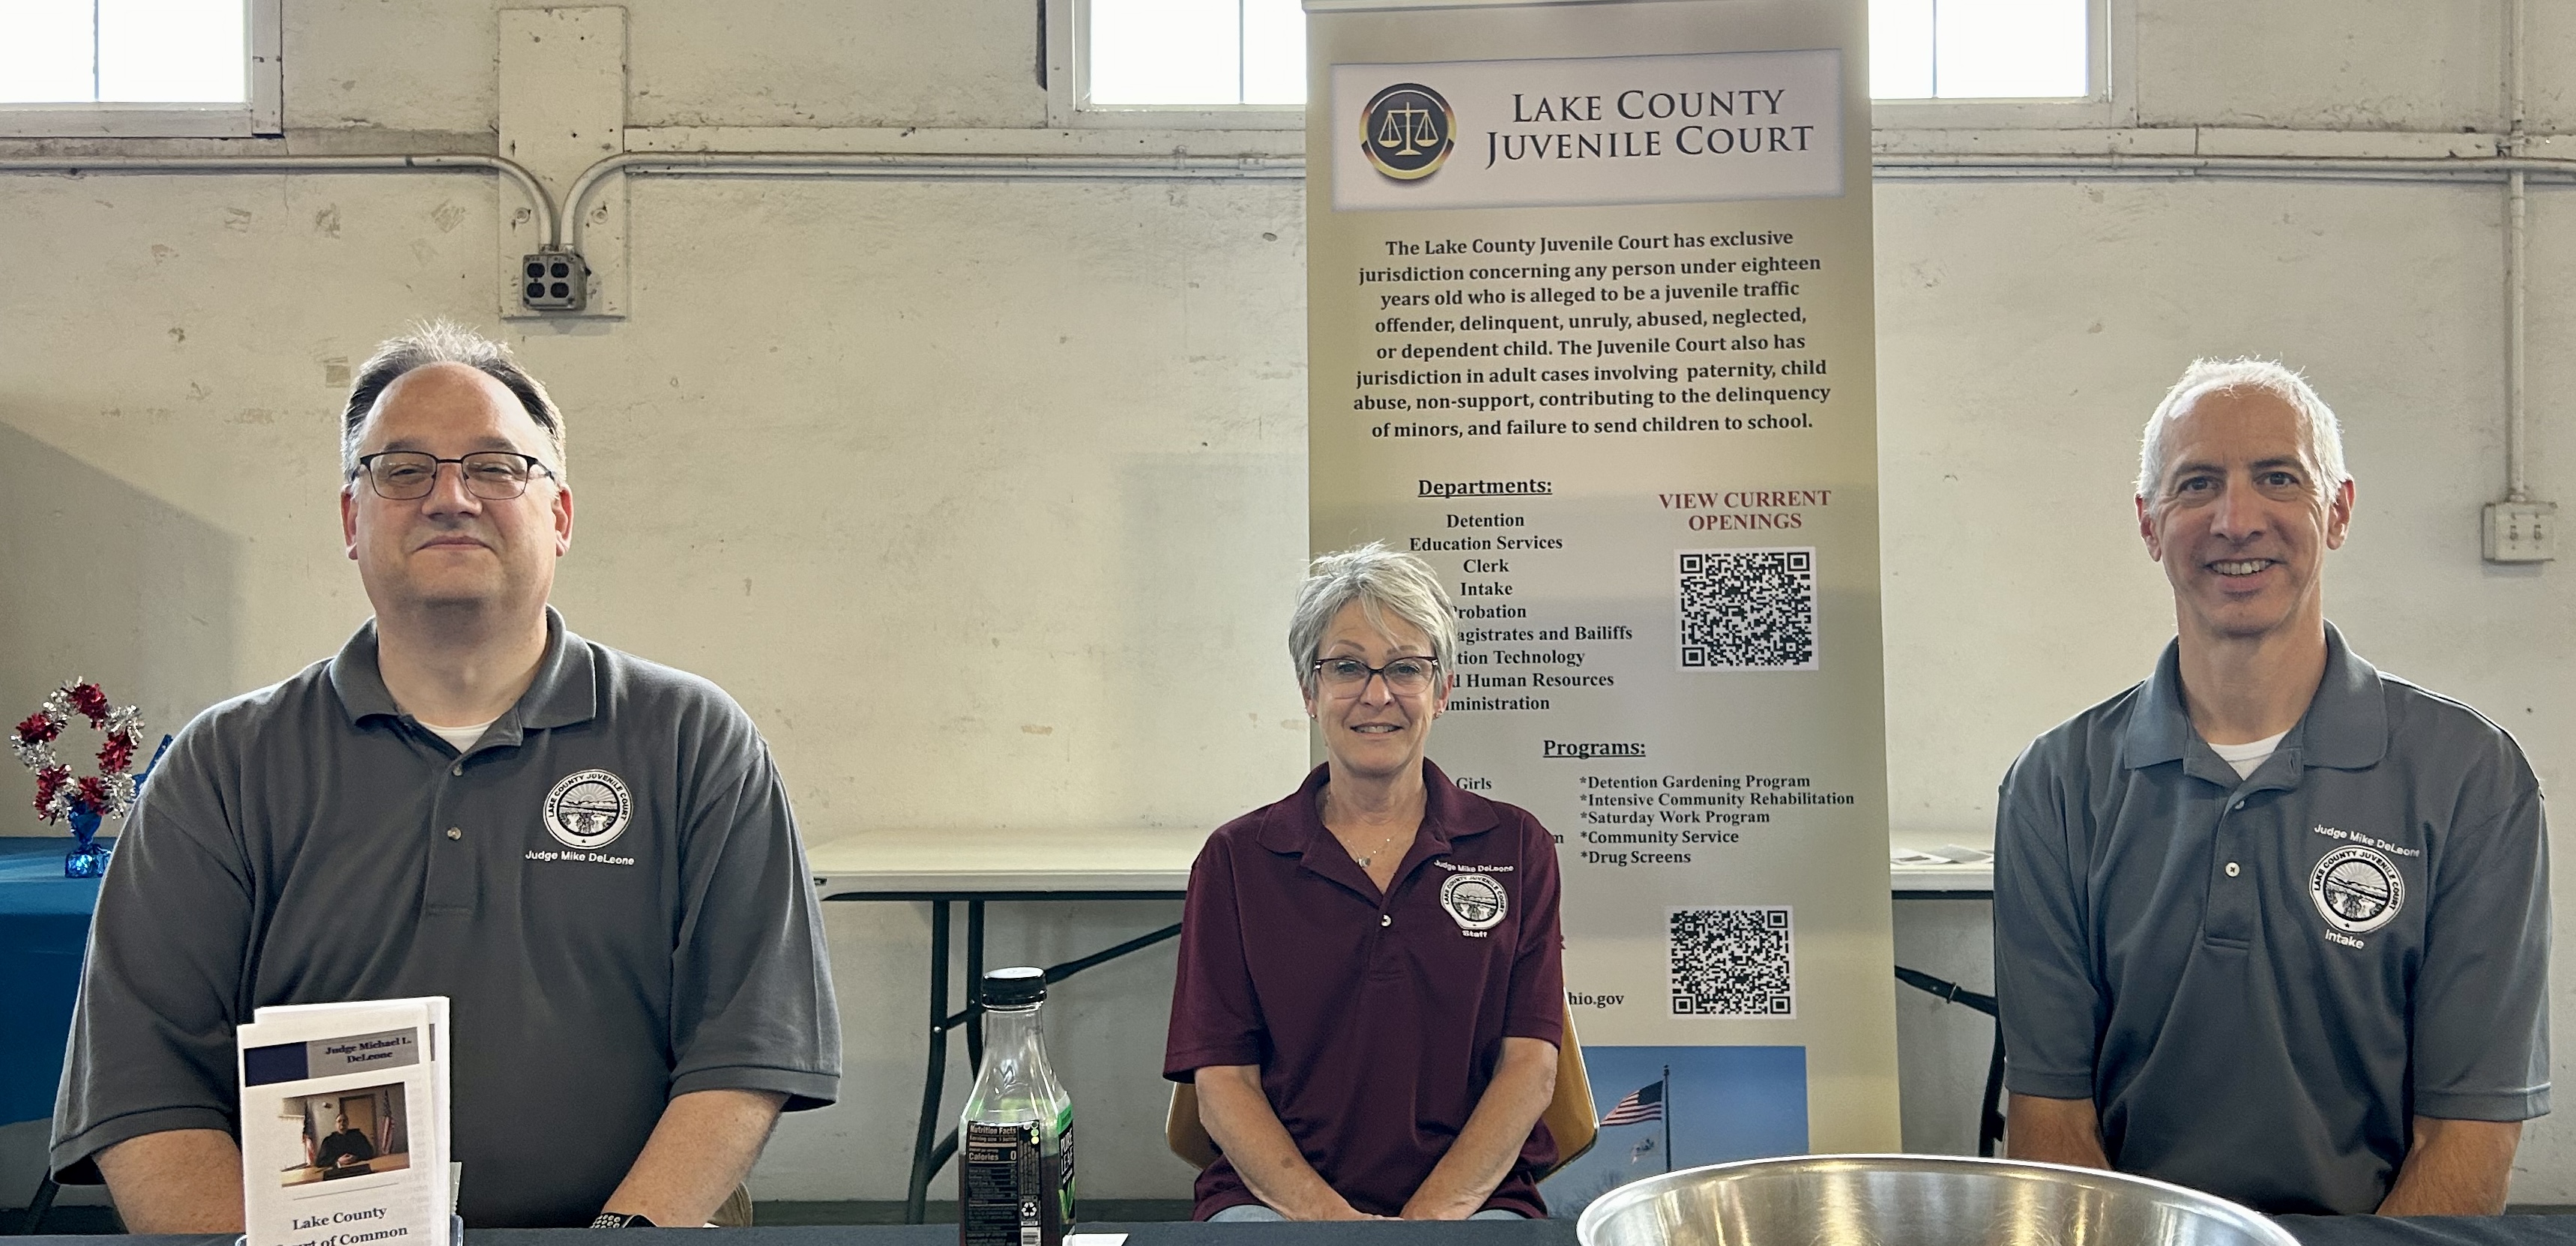 Judge DeLeone, Tami Carthen, and Keith Montesano all enjoyed talking and sharing information about the Court with people at the Lake County Fair today.